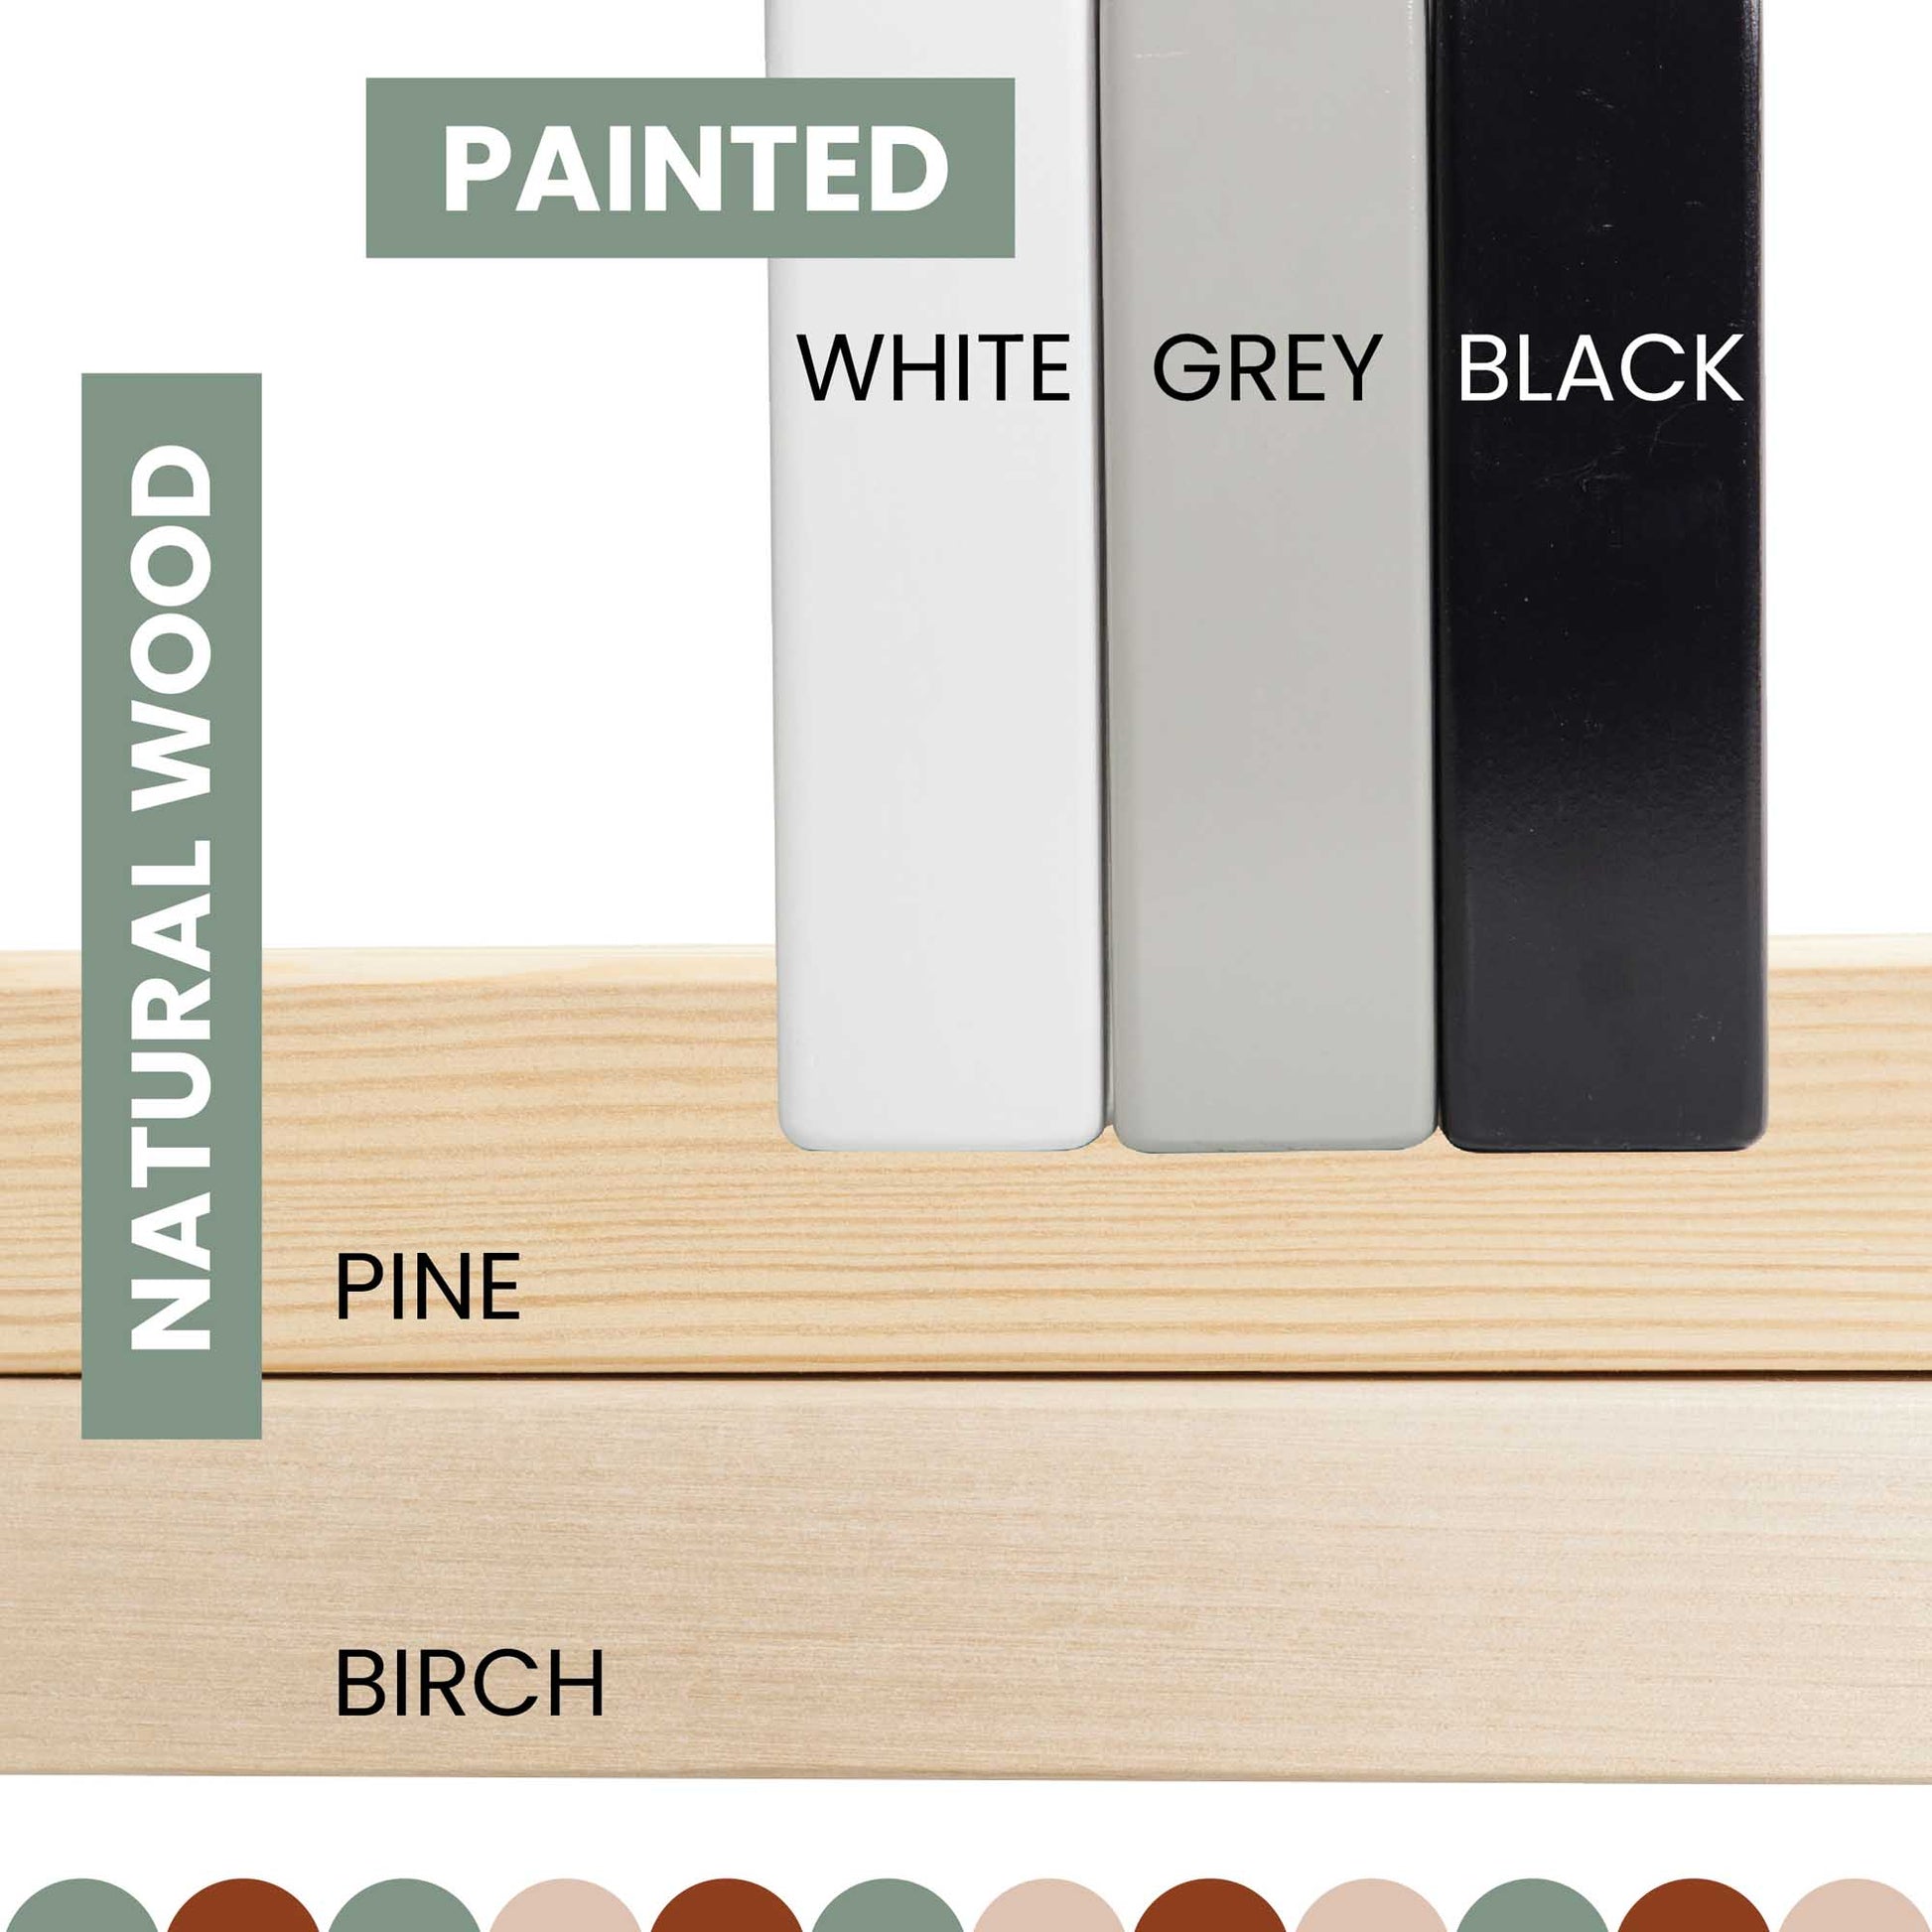 The paint colors for the house-shaped toddler desk with built-in storage include pine, birch, and white.